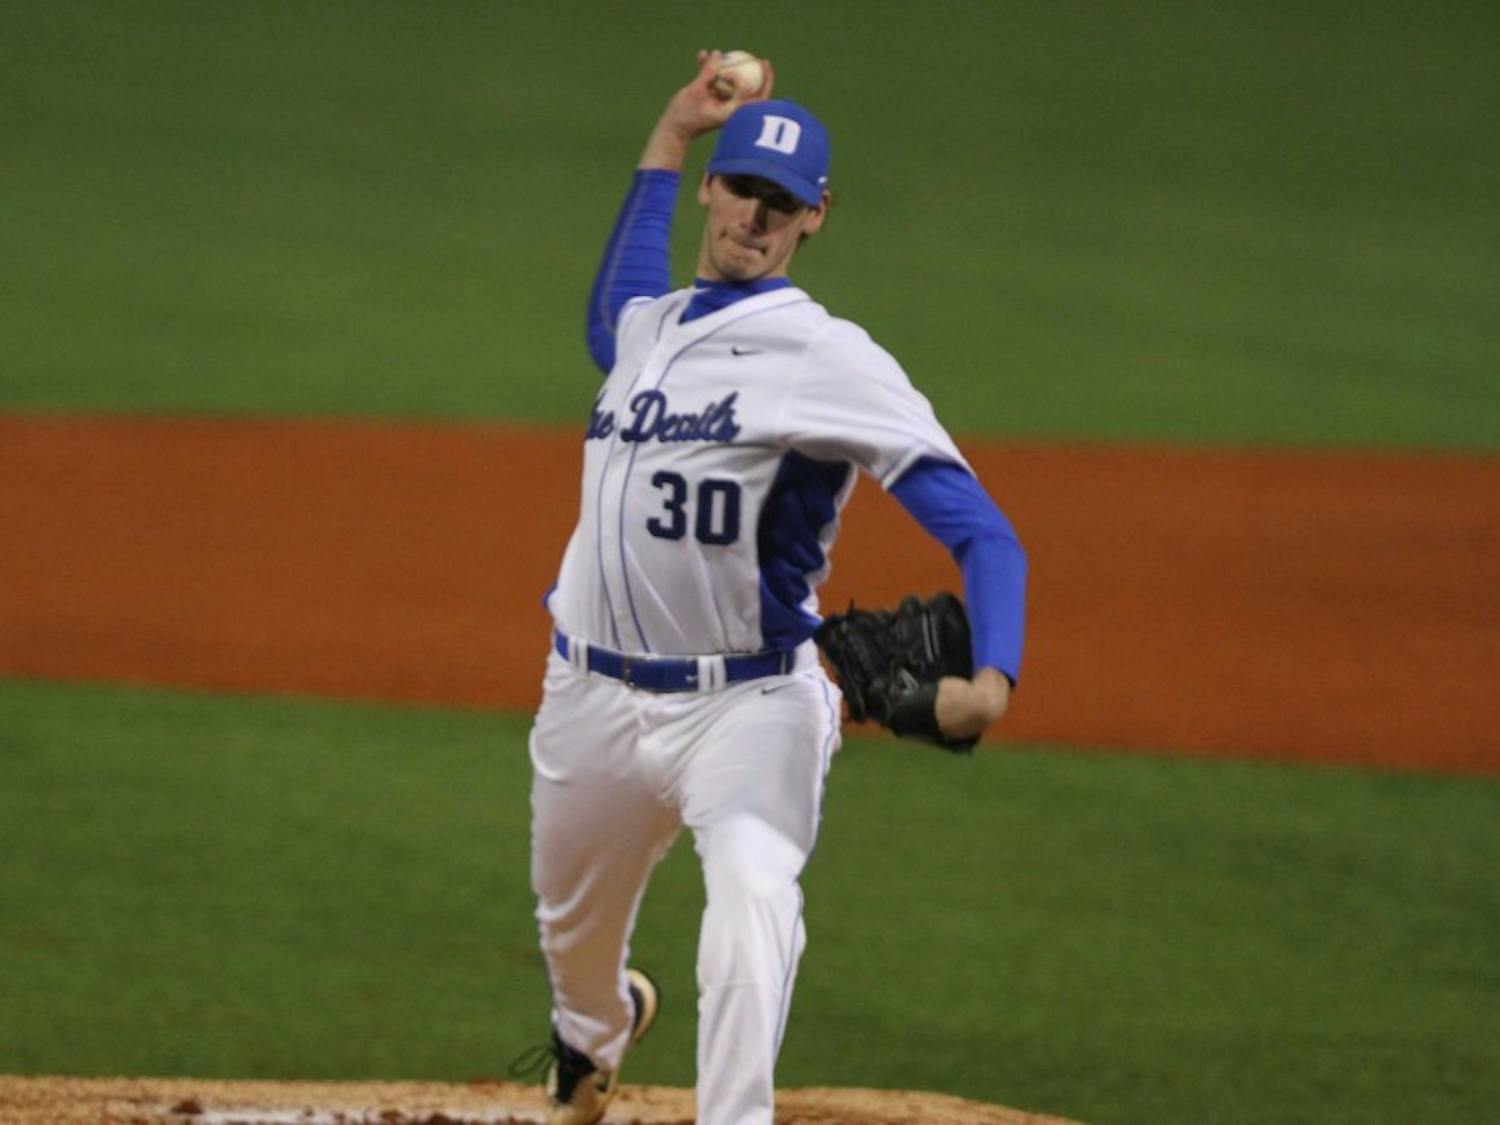 Duke ace Michael Matuella will take the mound in Friday's series opener against Boston College.